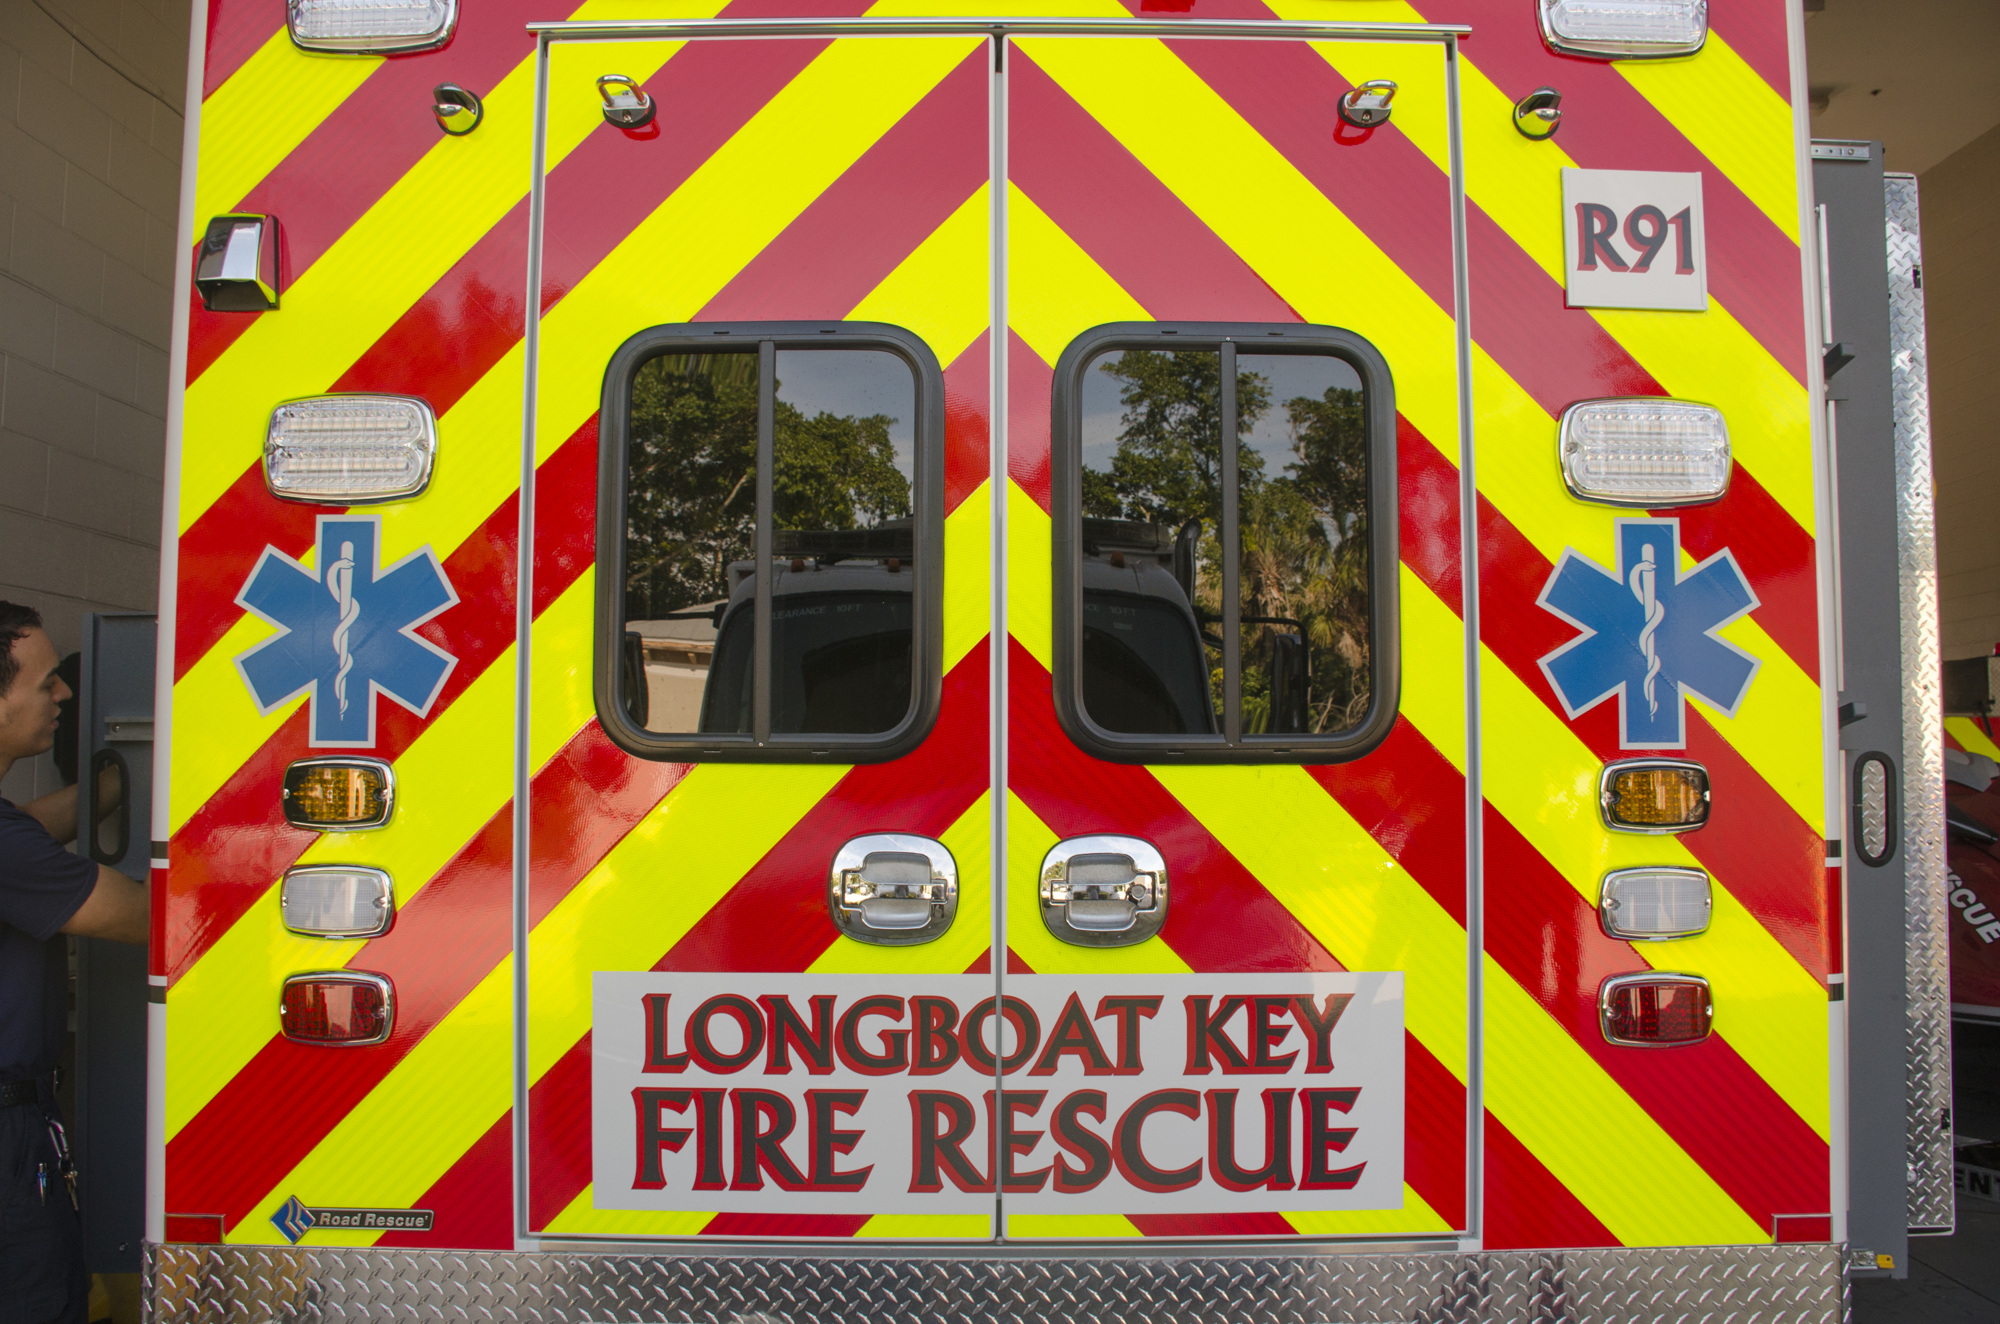 A reflective yellow and red chevron pattern covers the back of the truck, a Florida Department of Transportation requirement for all fire/rescue vehicles.